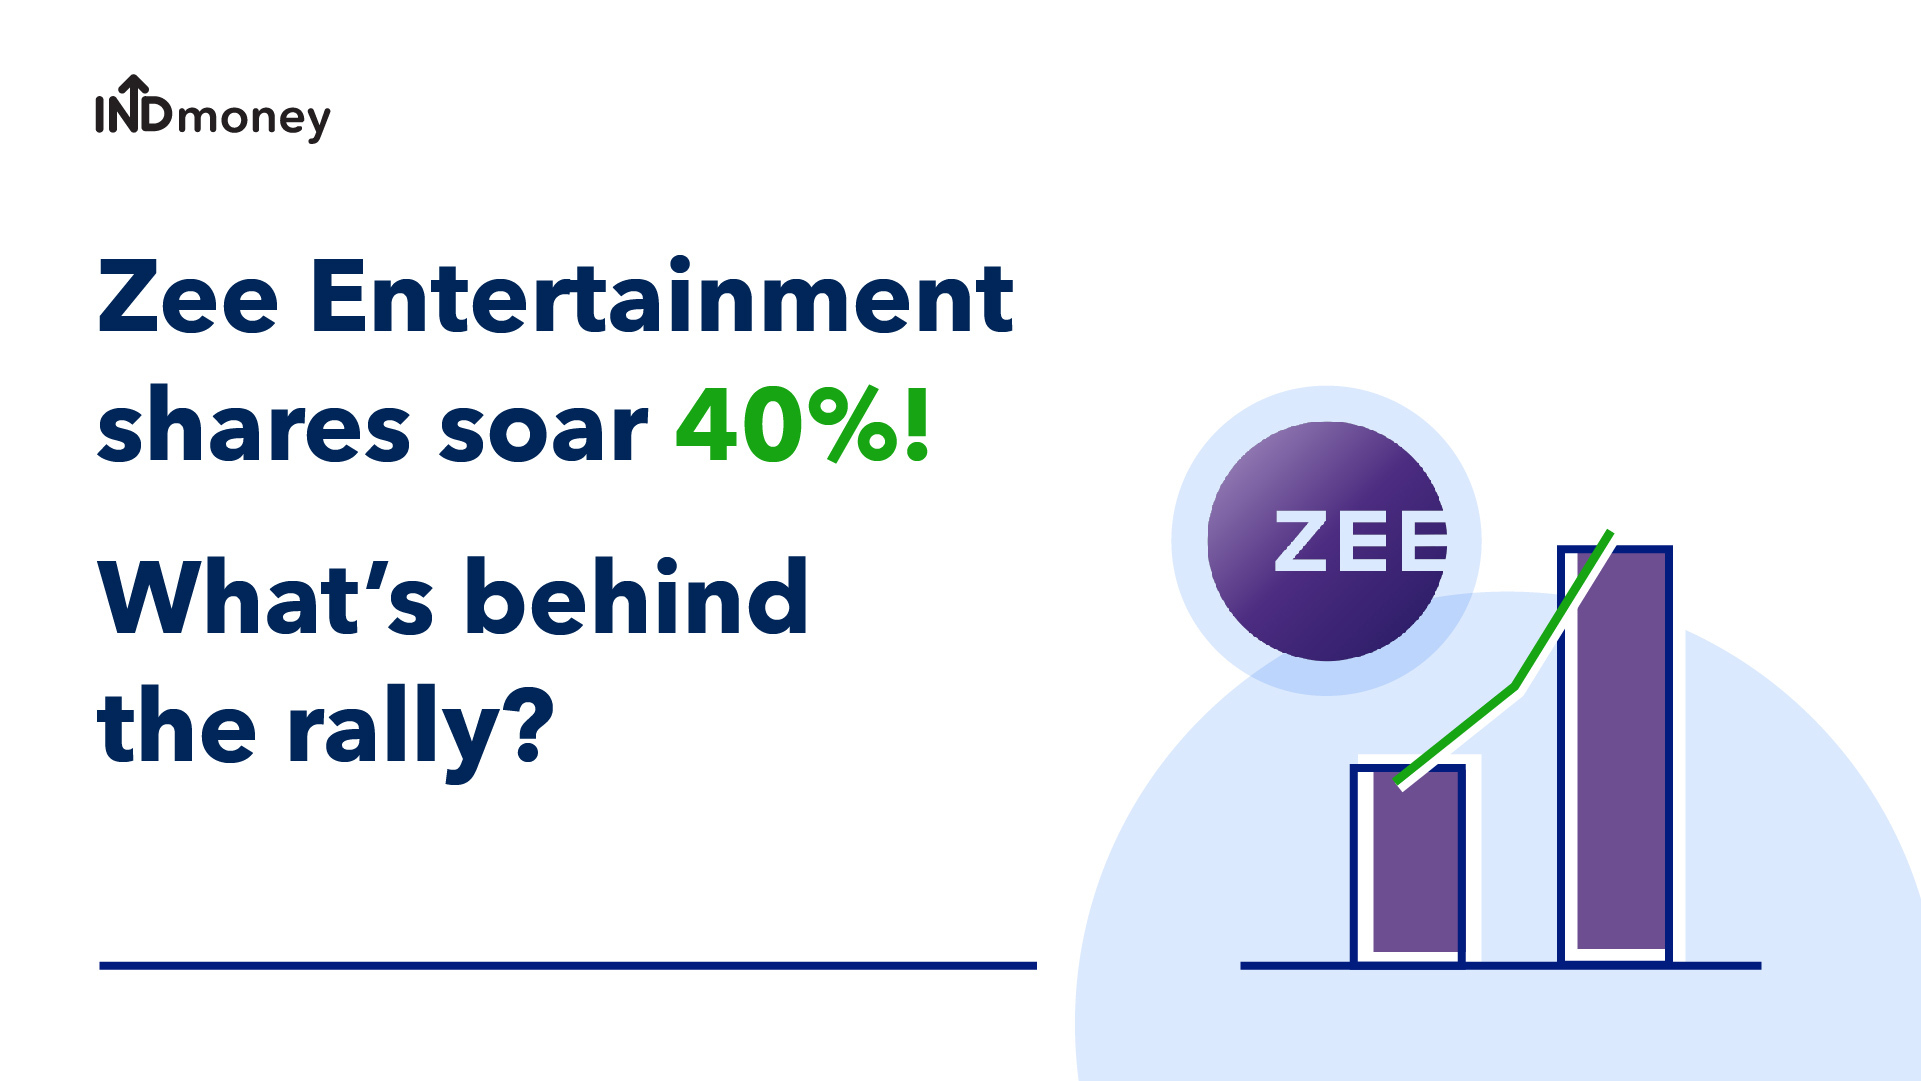 Zee Entertainment shares soar 40%! What’s behind the rally?